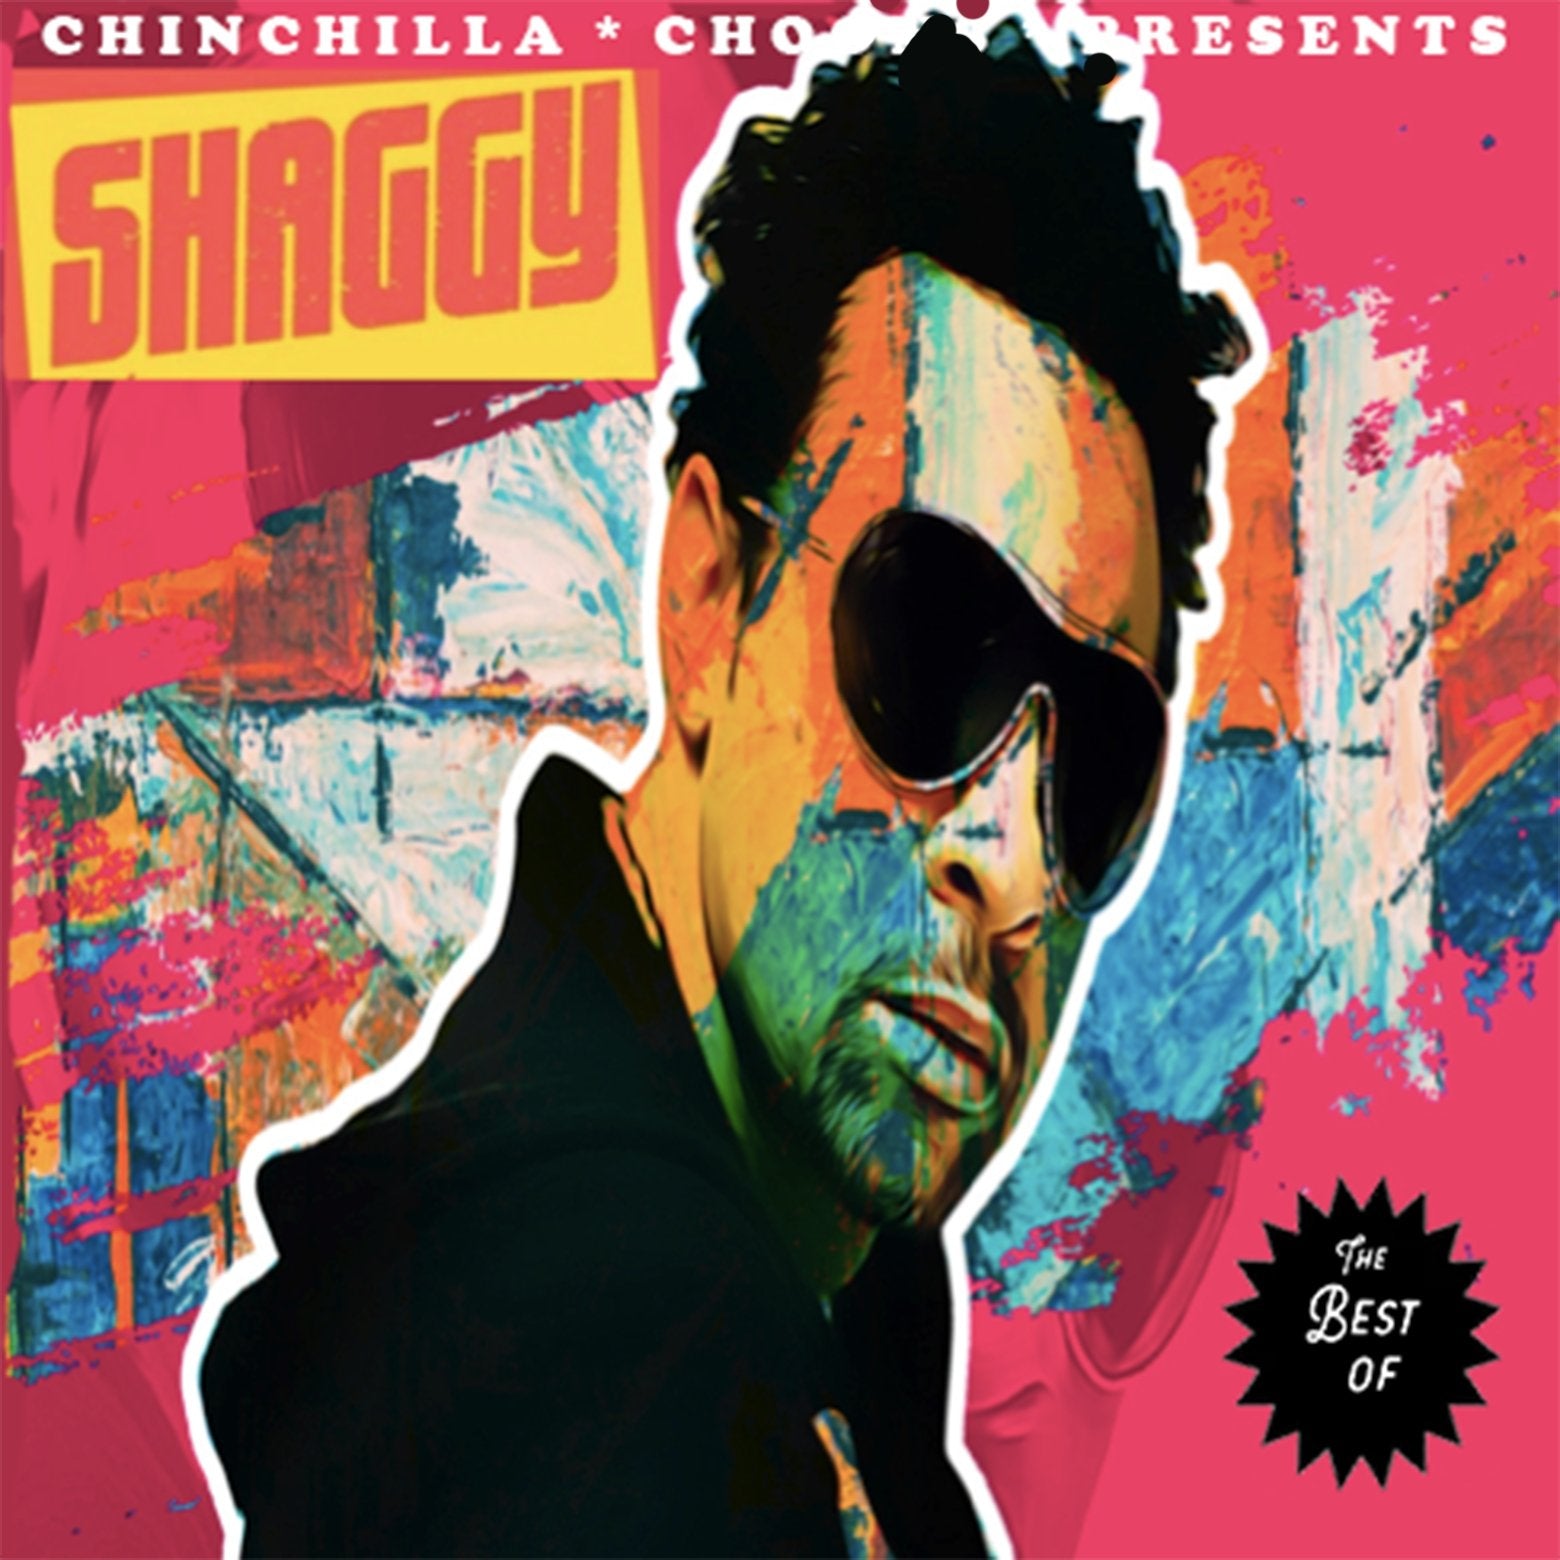 Shaggy-The Boombastic Collection - Best of Shaggy full album zip